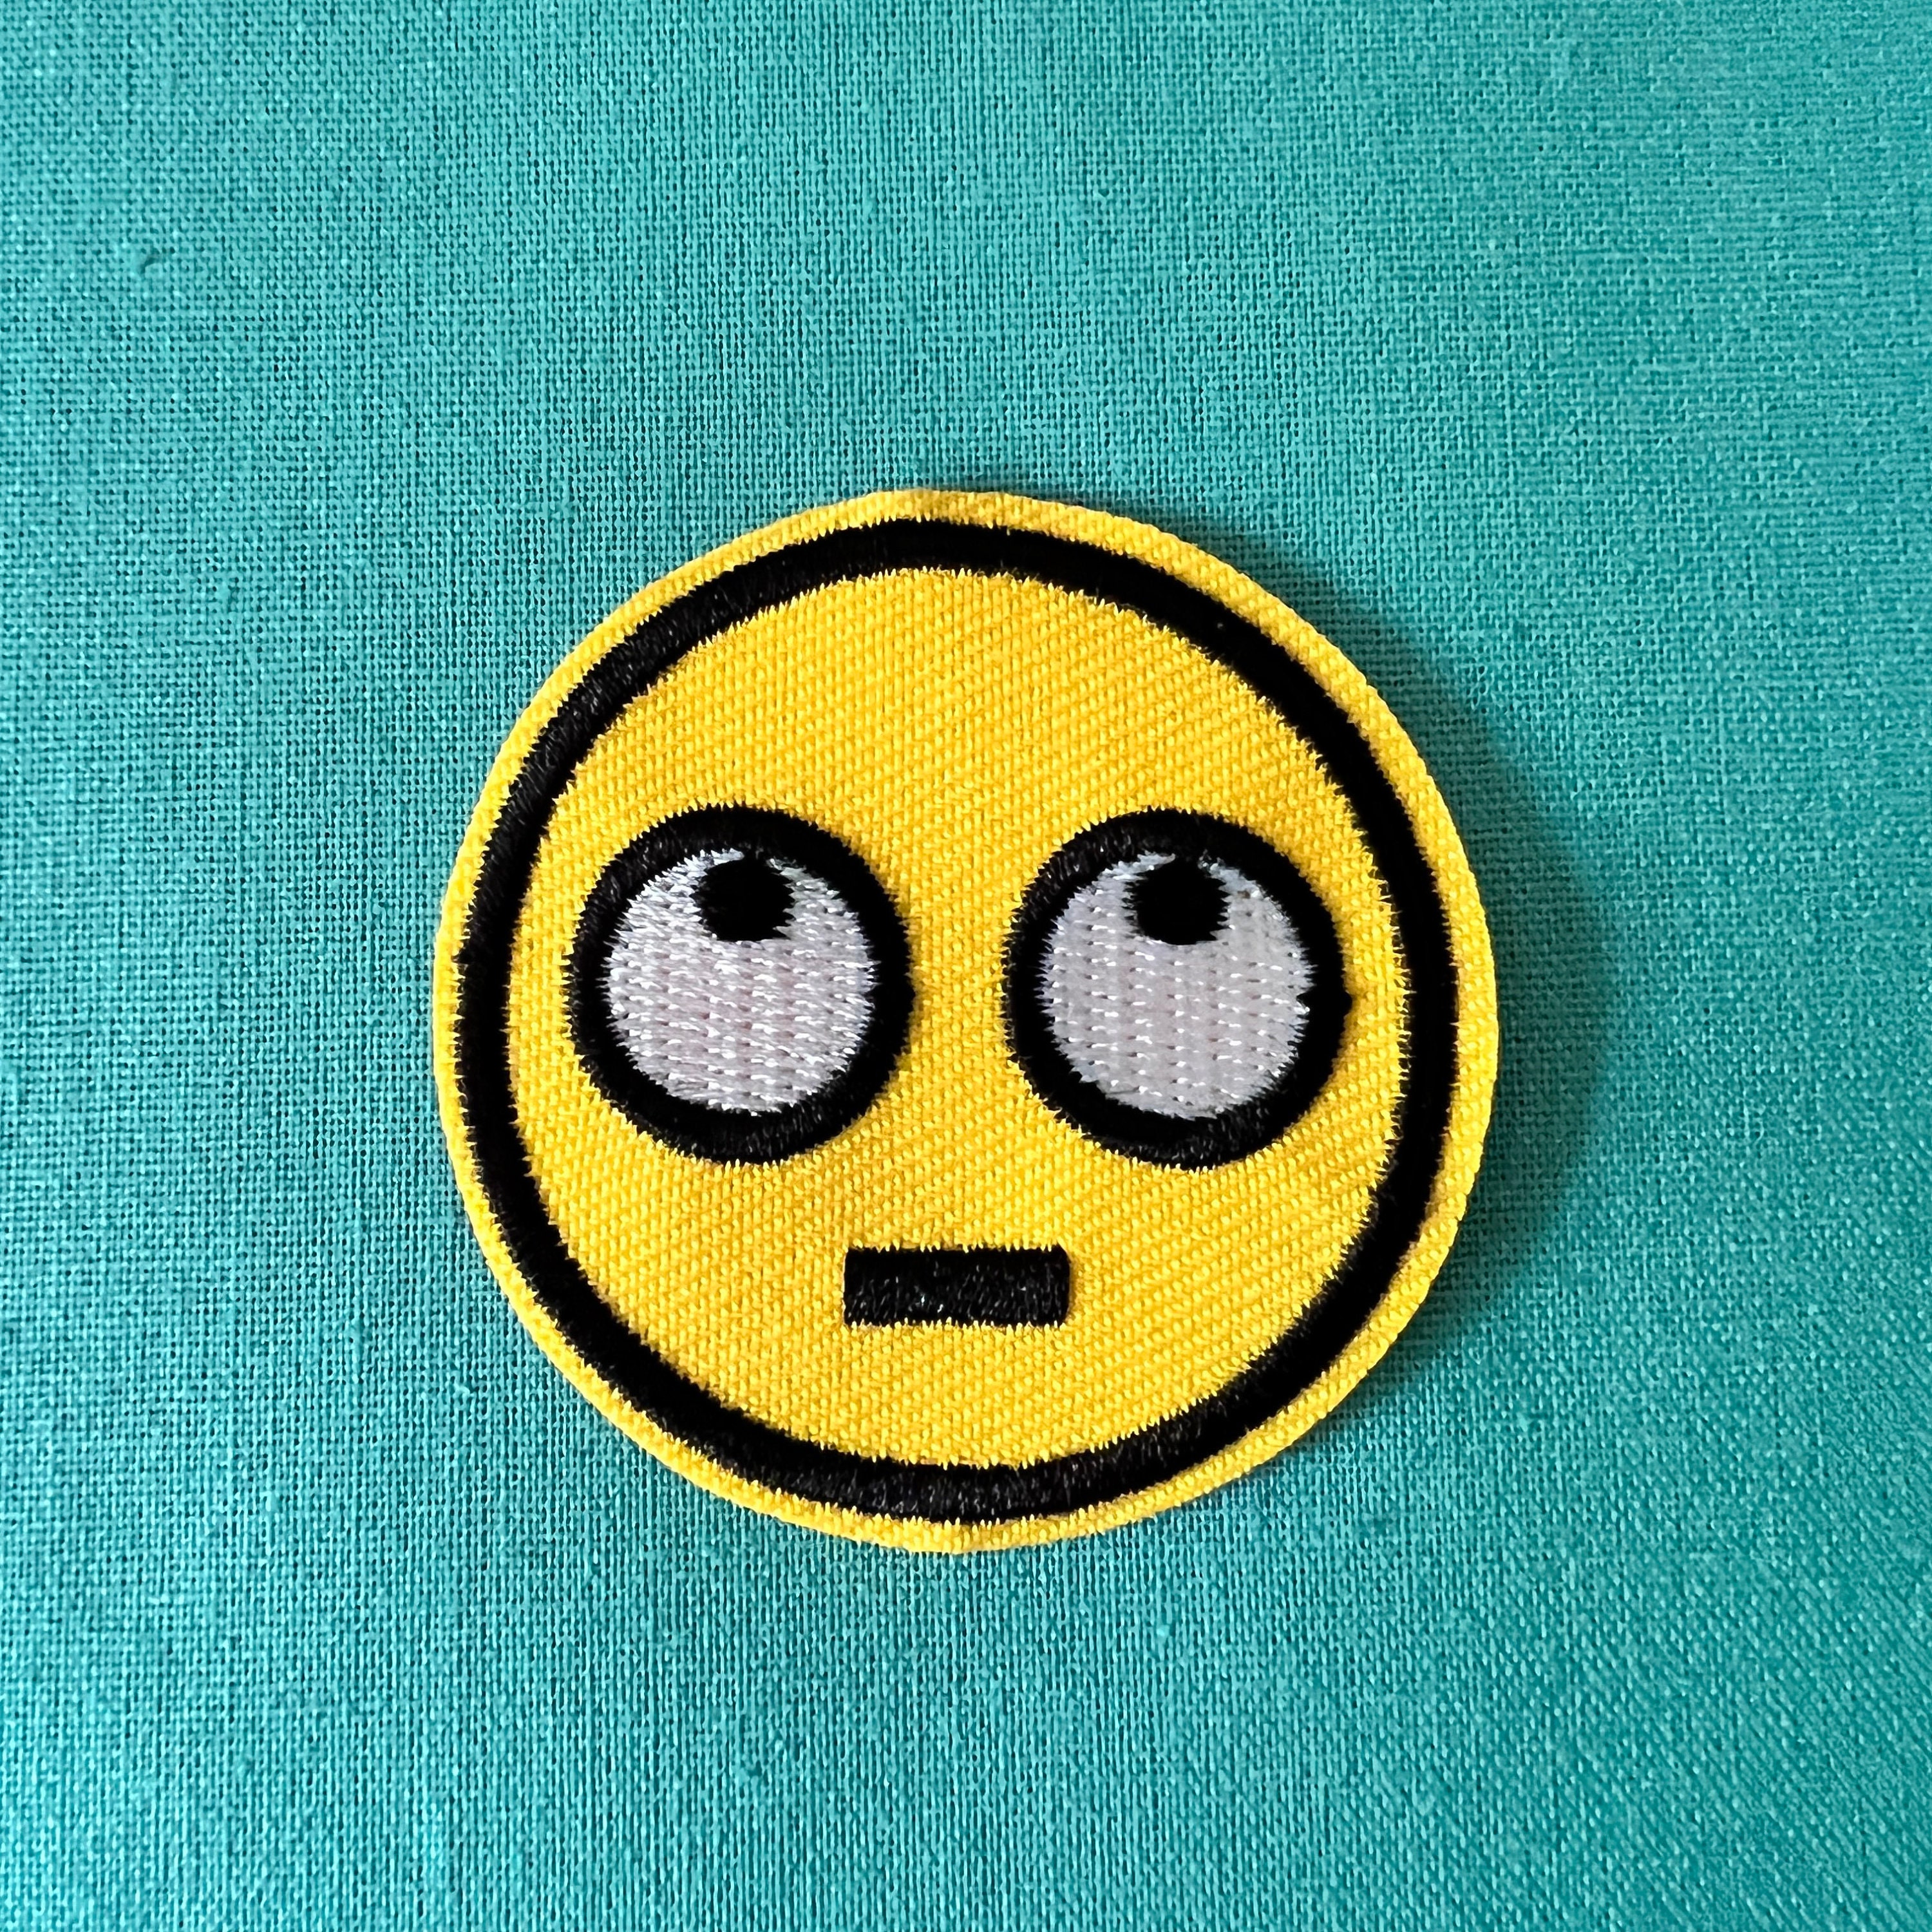 YELLOW SMILEY FACE EMOJI VINTAGE EMBROIDERED PATCH - IRON ON/SEW ON (2.75  DIA)